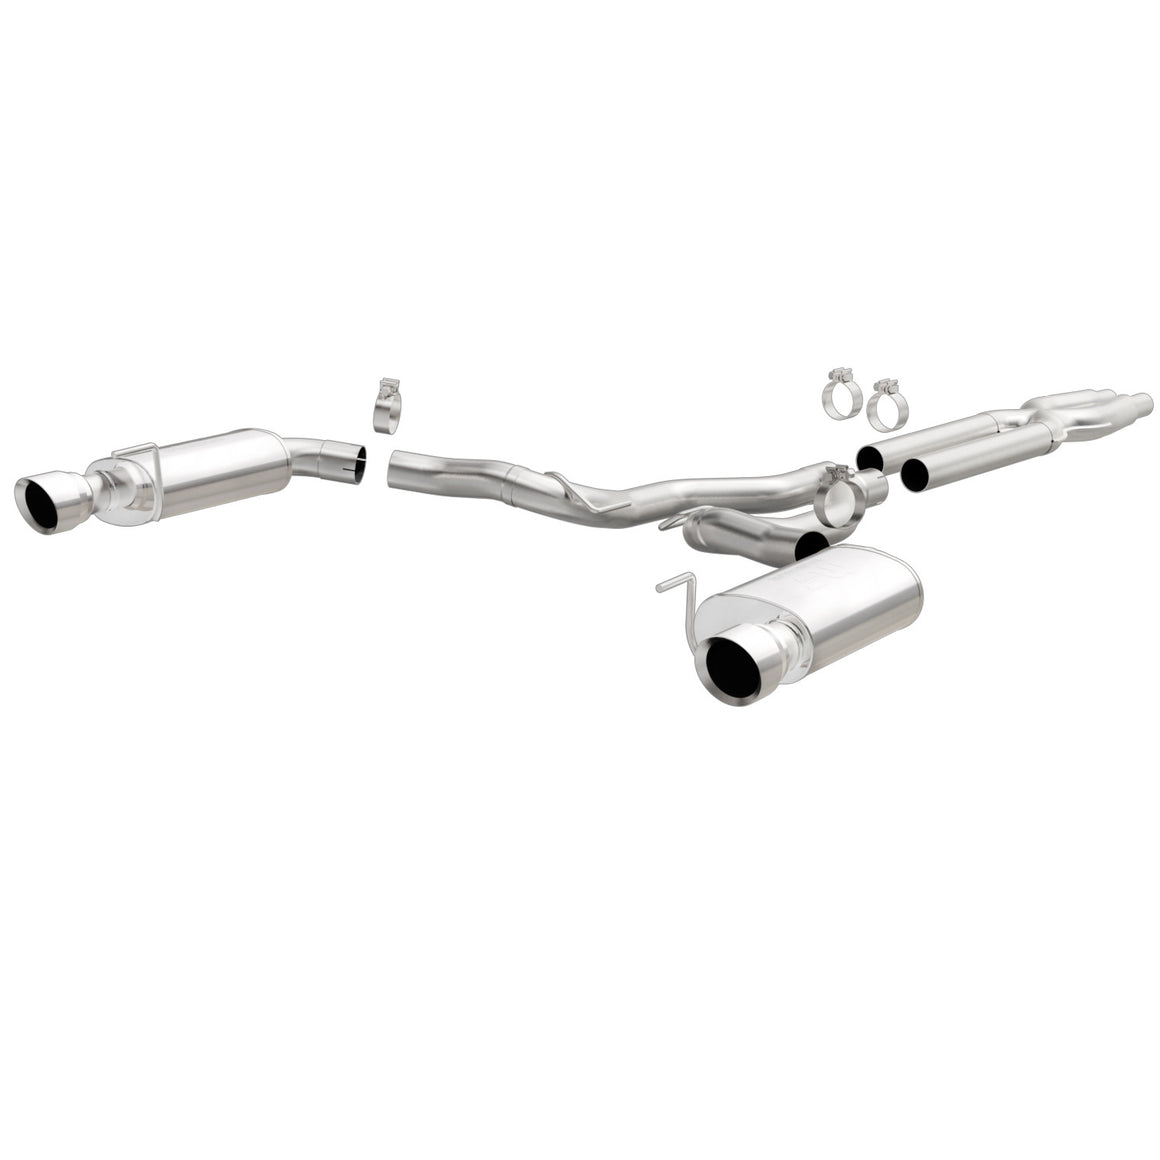 2015 Mustang GT 5.0 Magnaflow Competition Series Cat-Back Exhaust System